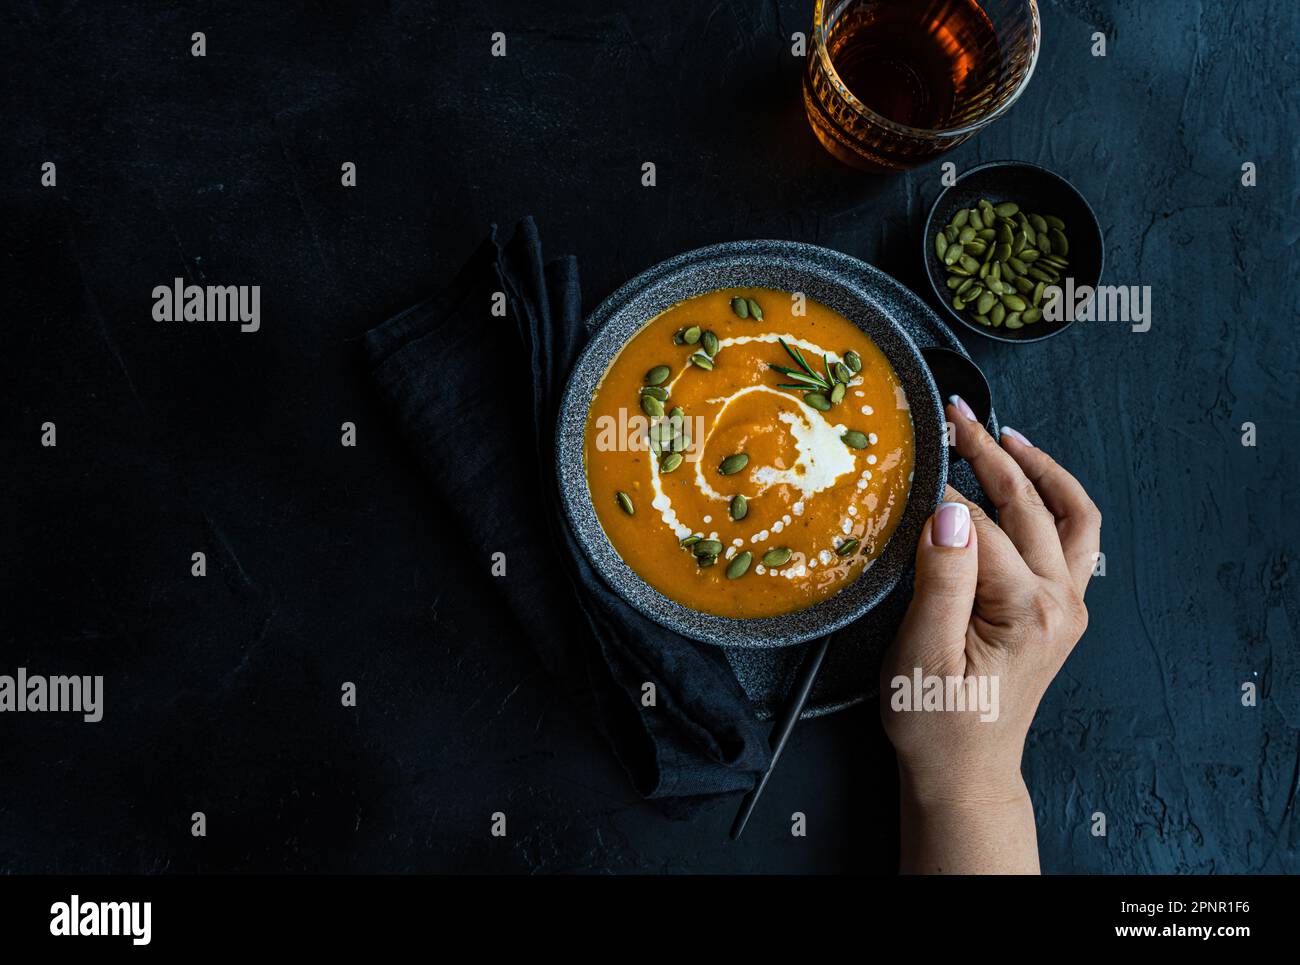 Overhead view of a woman reaching for a bowl of pumpkin soup with sour cream and a glass of wine Stock Photo